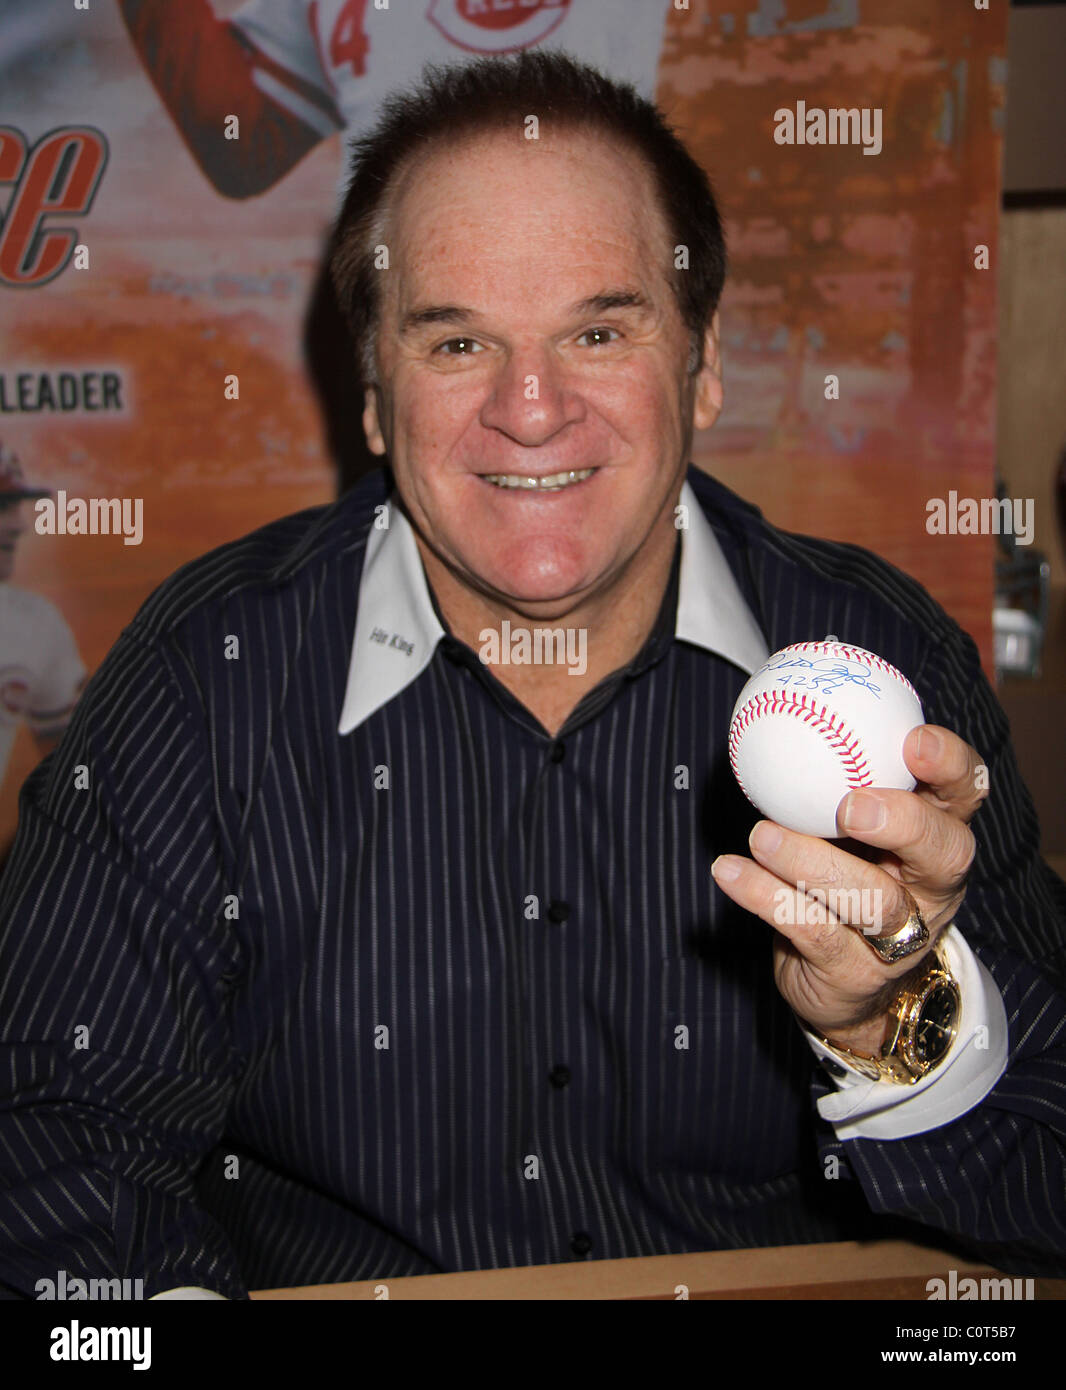 Pete rose hi-res stock photography and images - Alamy